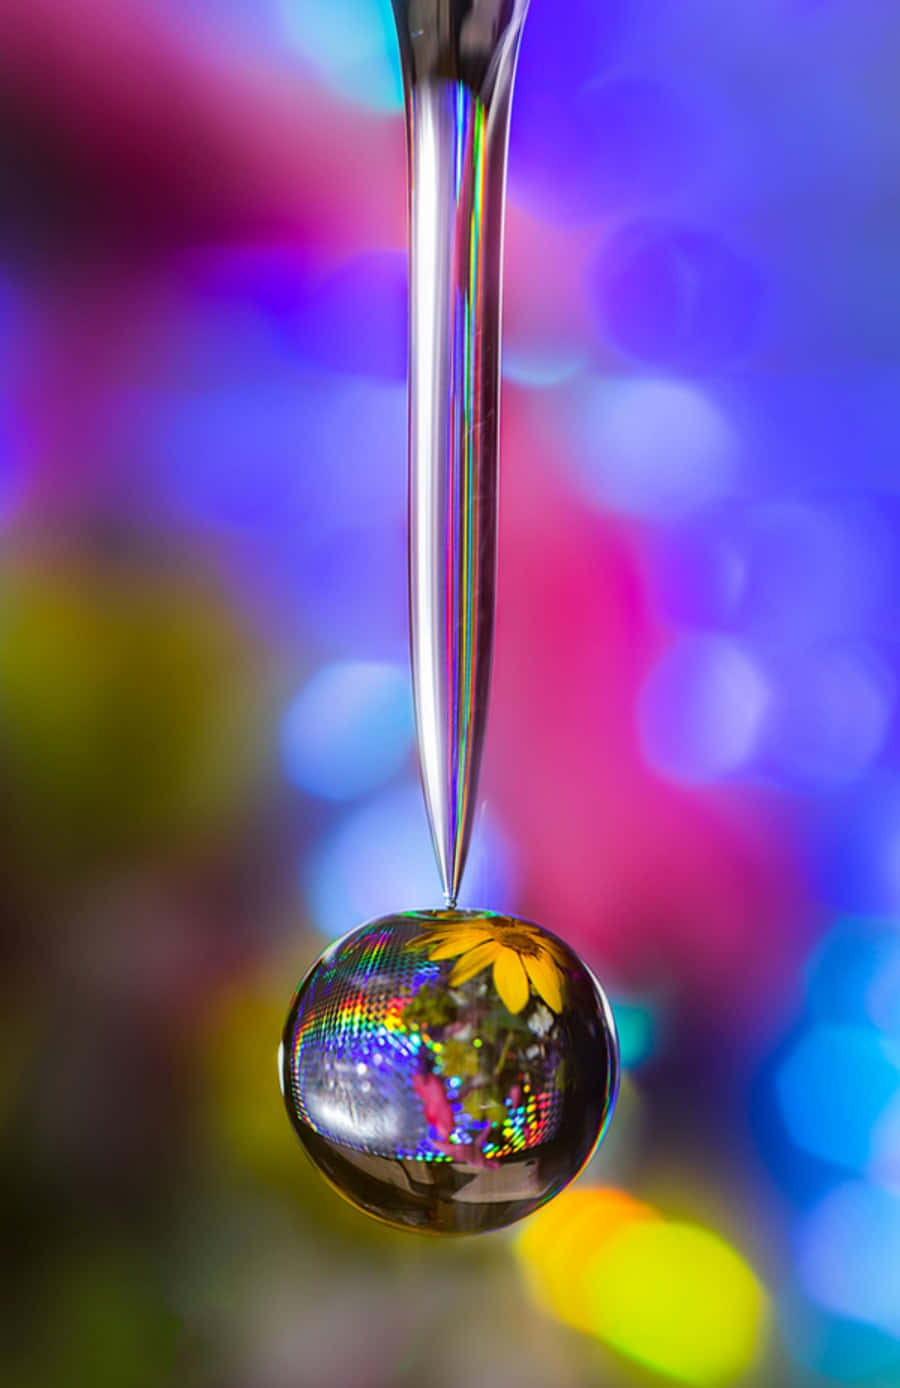 The mysterious beauty of a single water drop